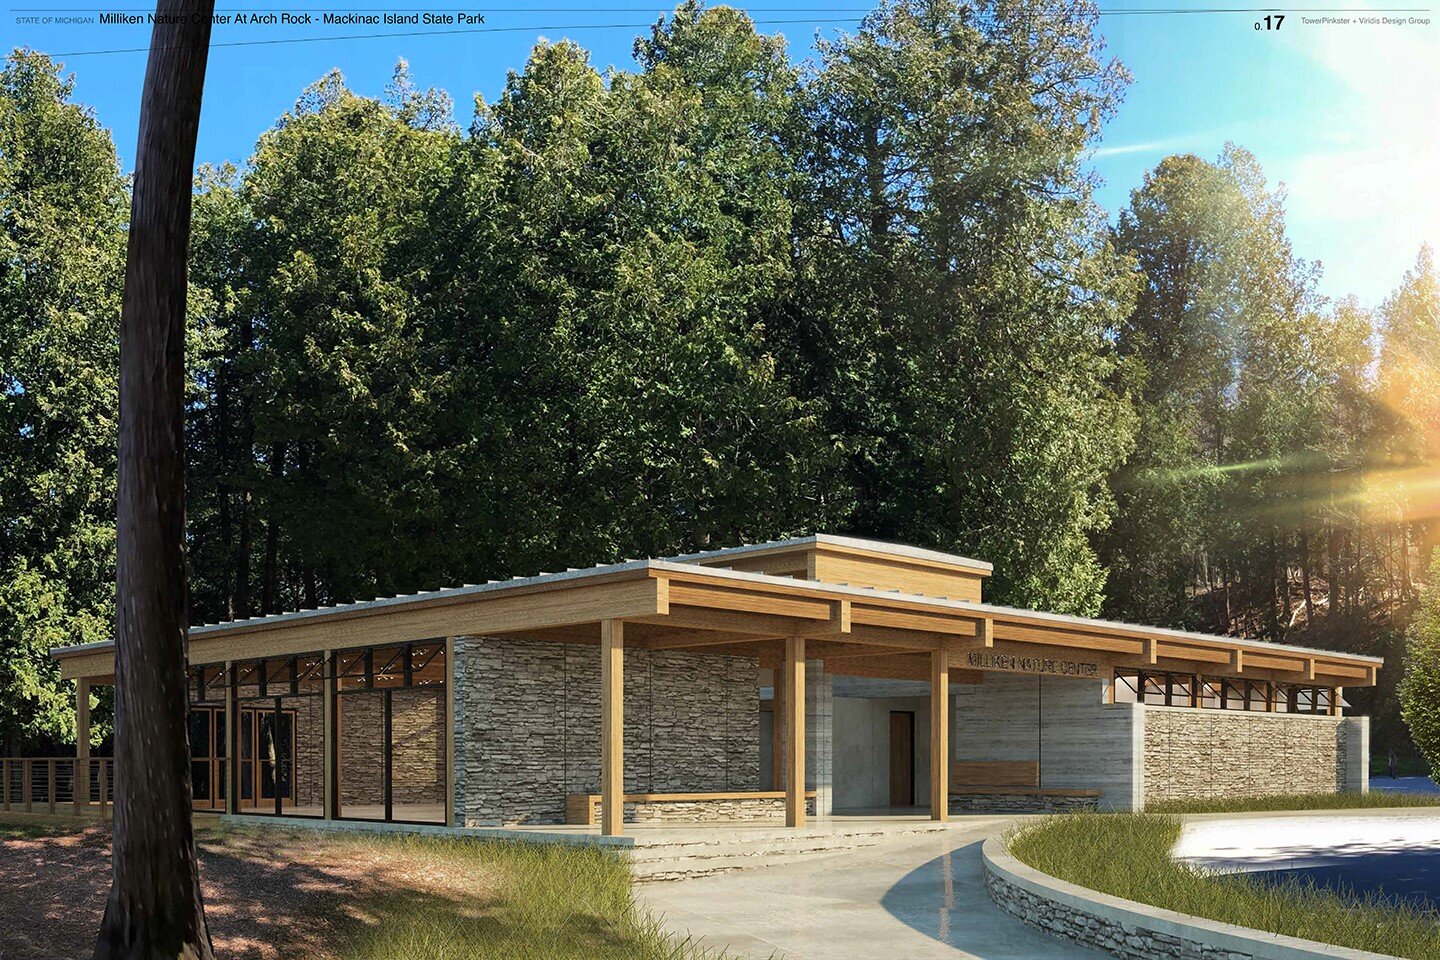 A rendering of the Milliken Nature Center at Arch Rock.